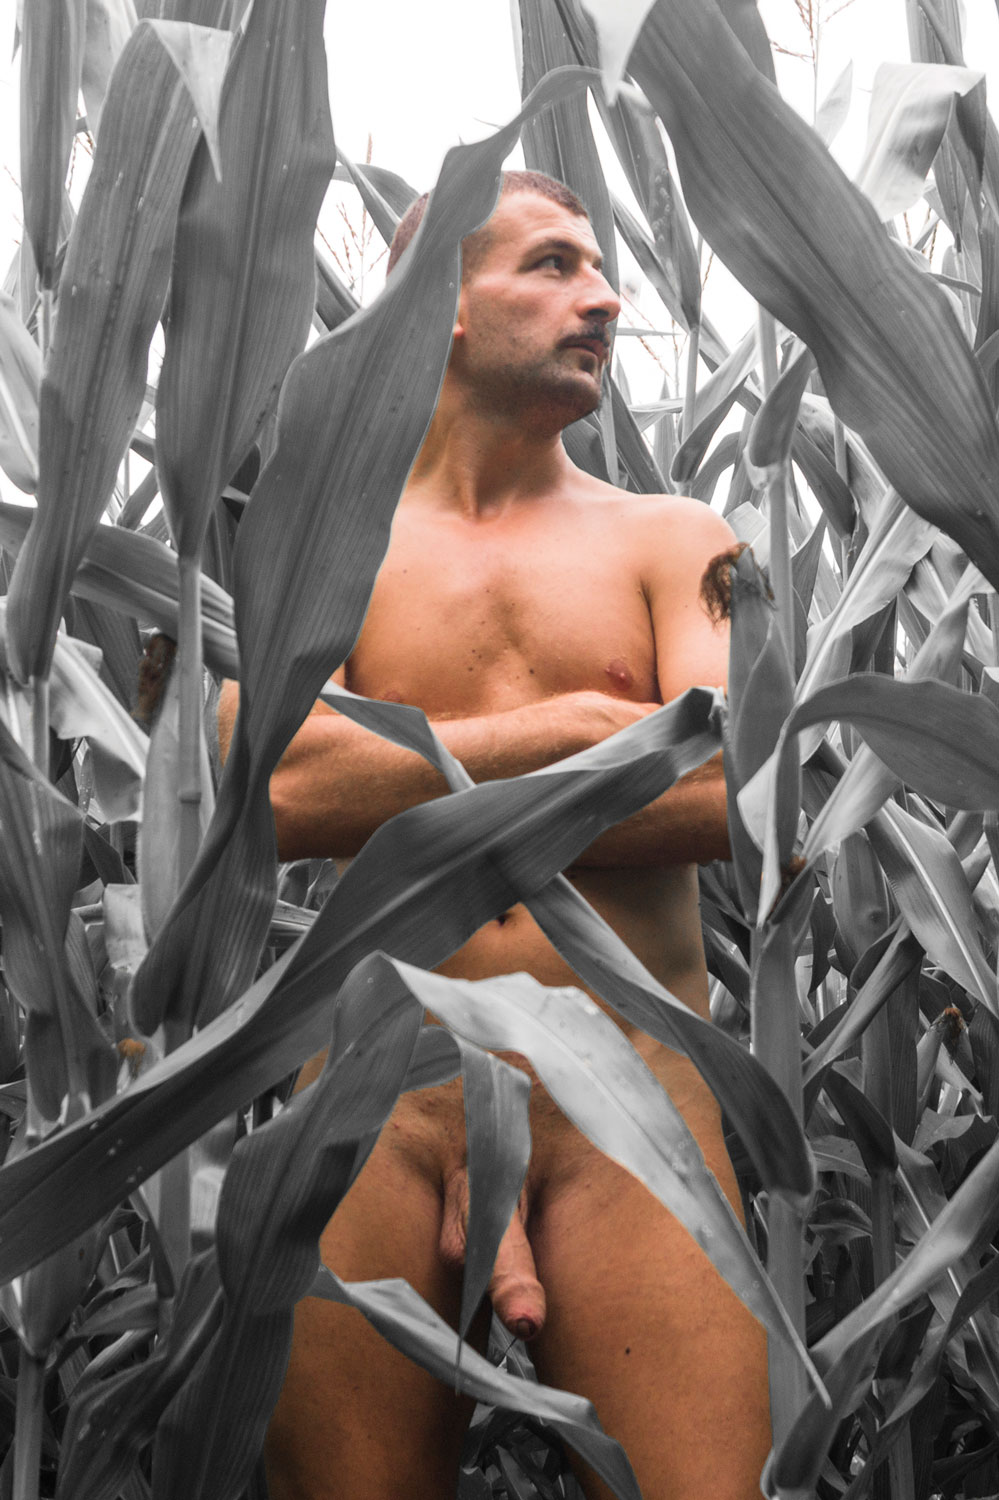 – EXCLUSIVE – EXPLICIT CONTENT – «NATURE» – Alberto Trancón by Odiseo.